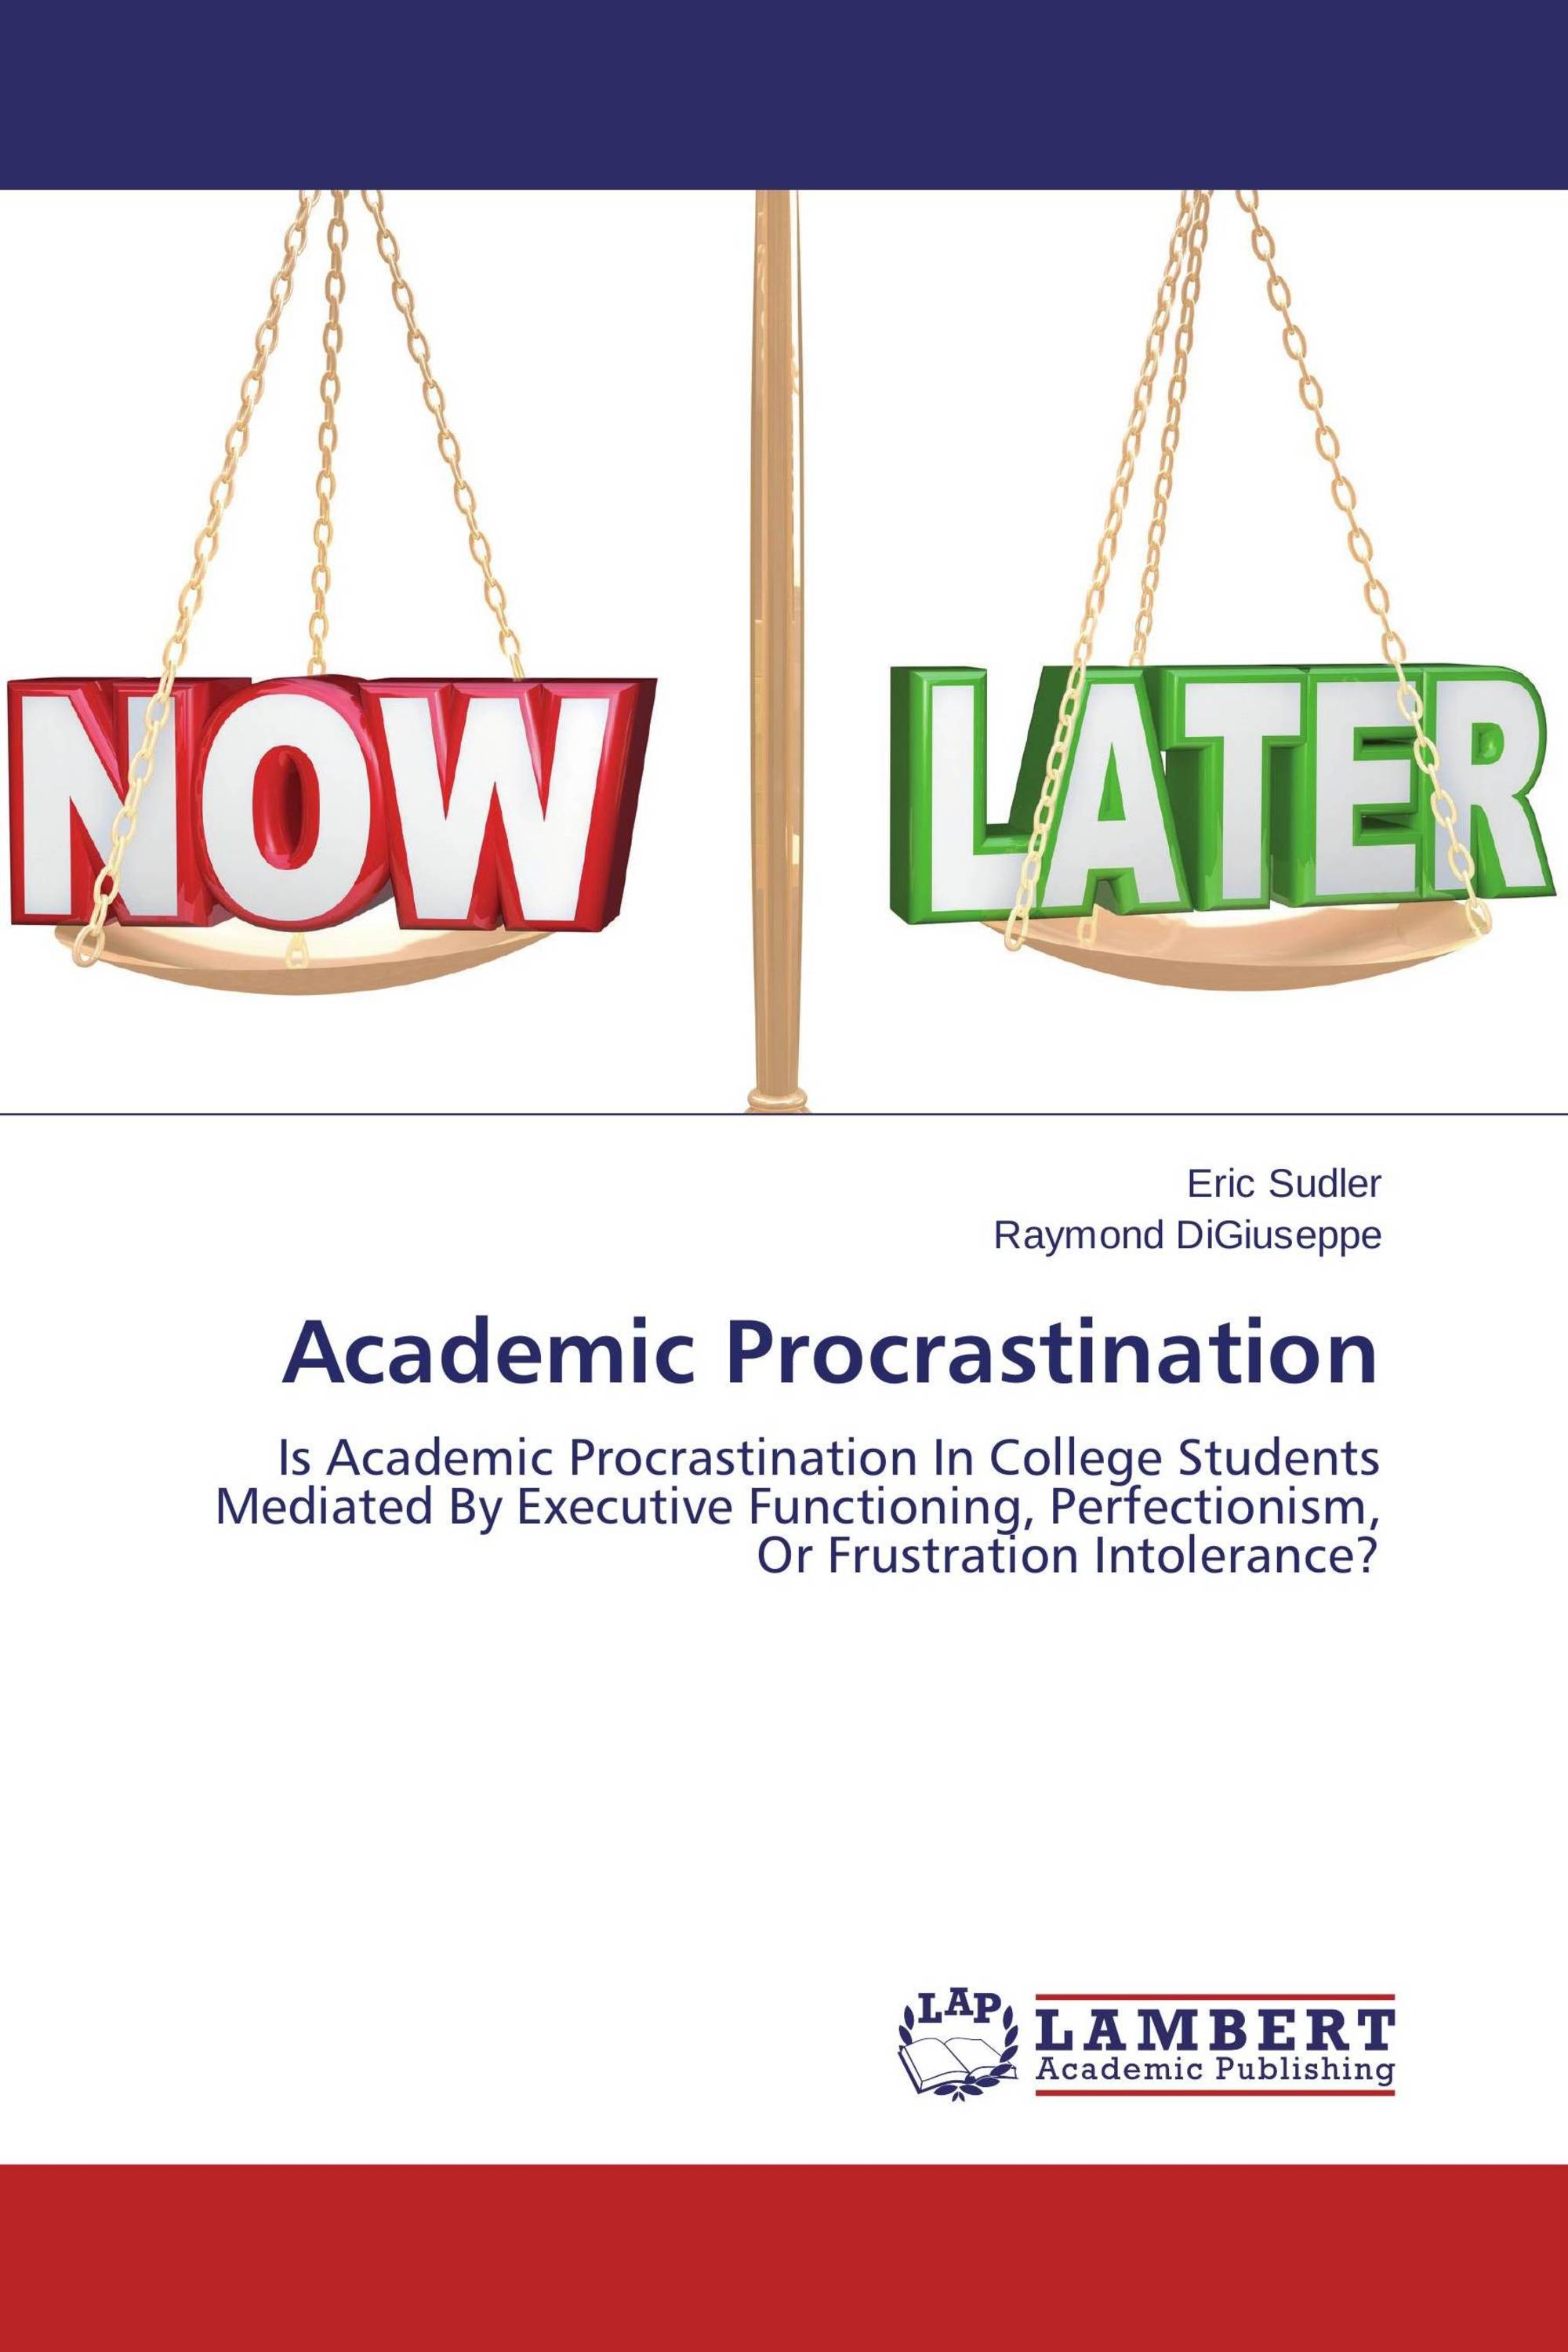 research report about procrastination